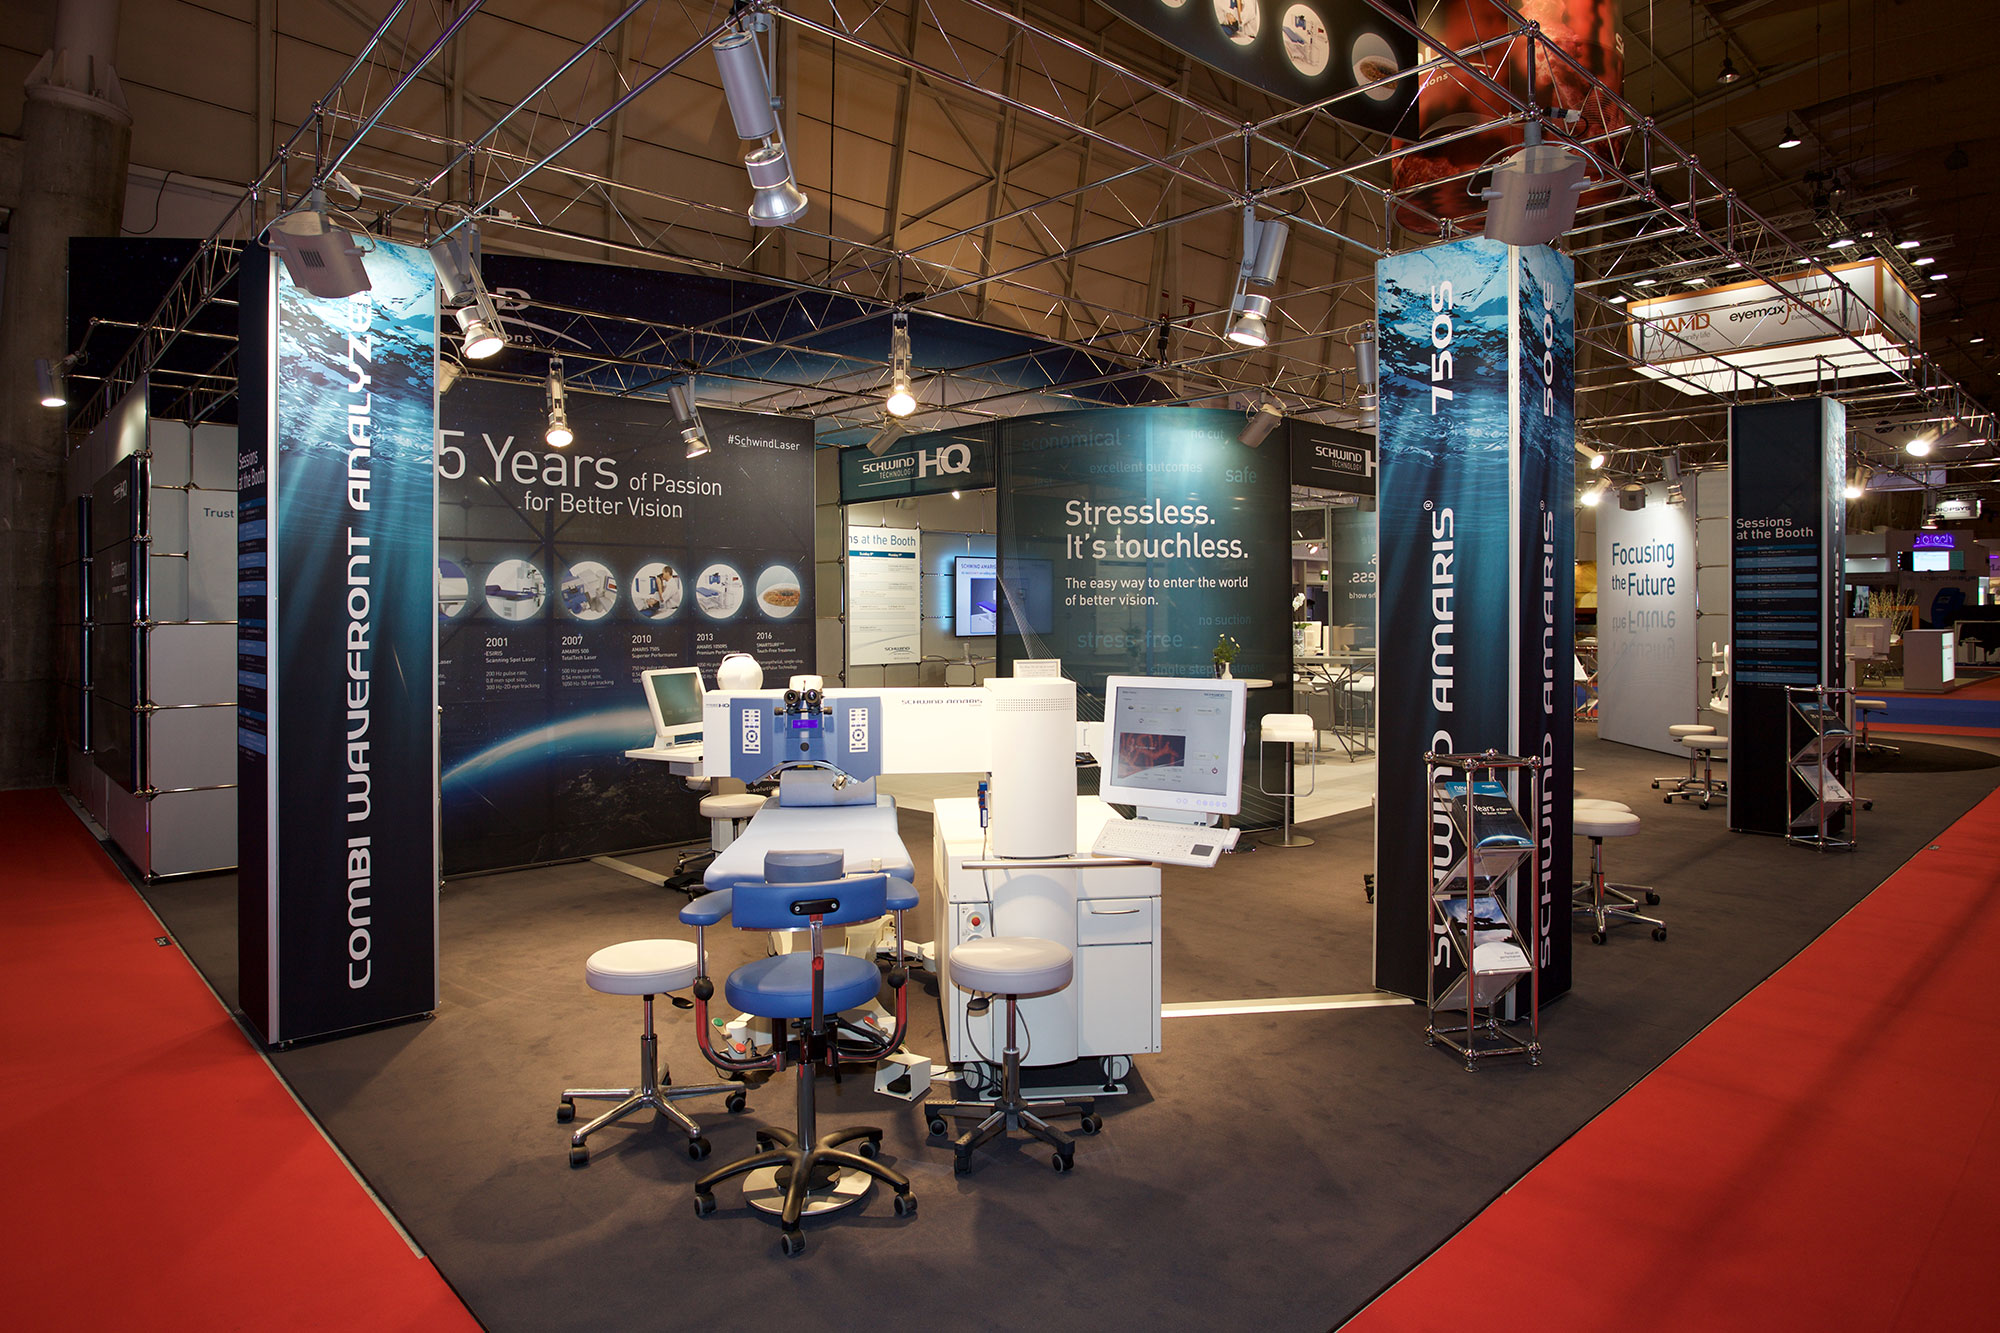 Exhibition stand of Schwind at the ESCRS 2017